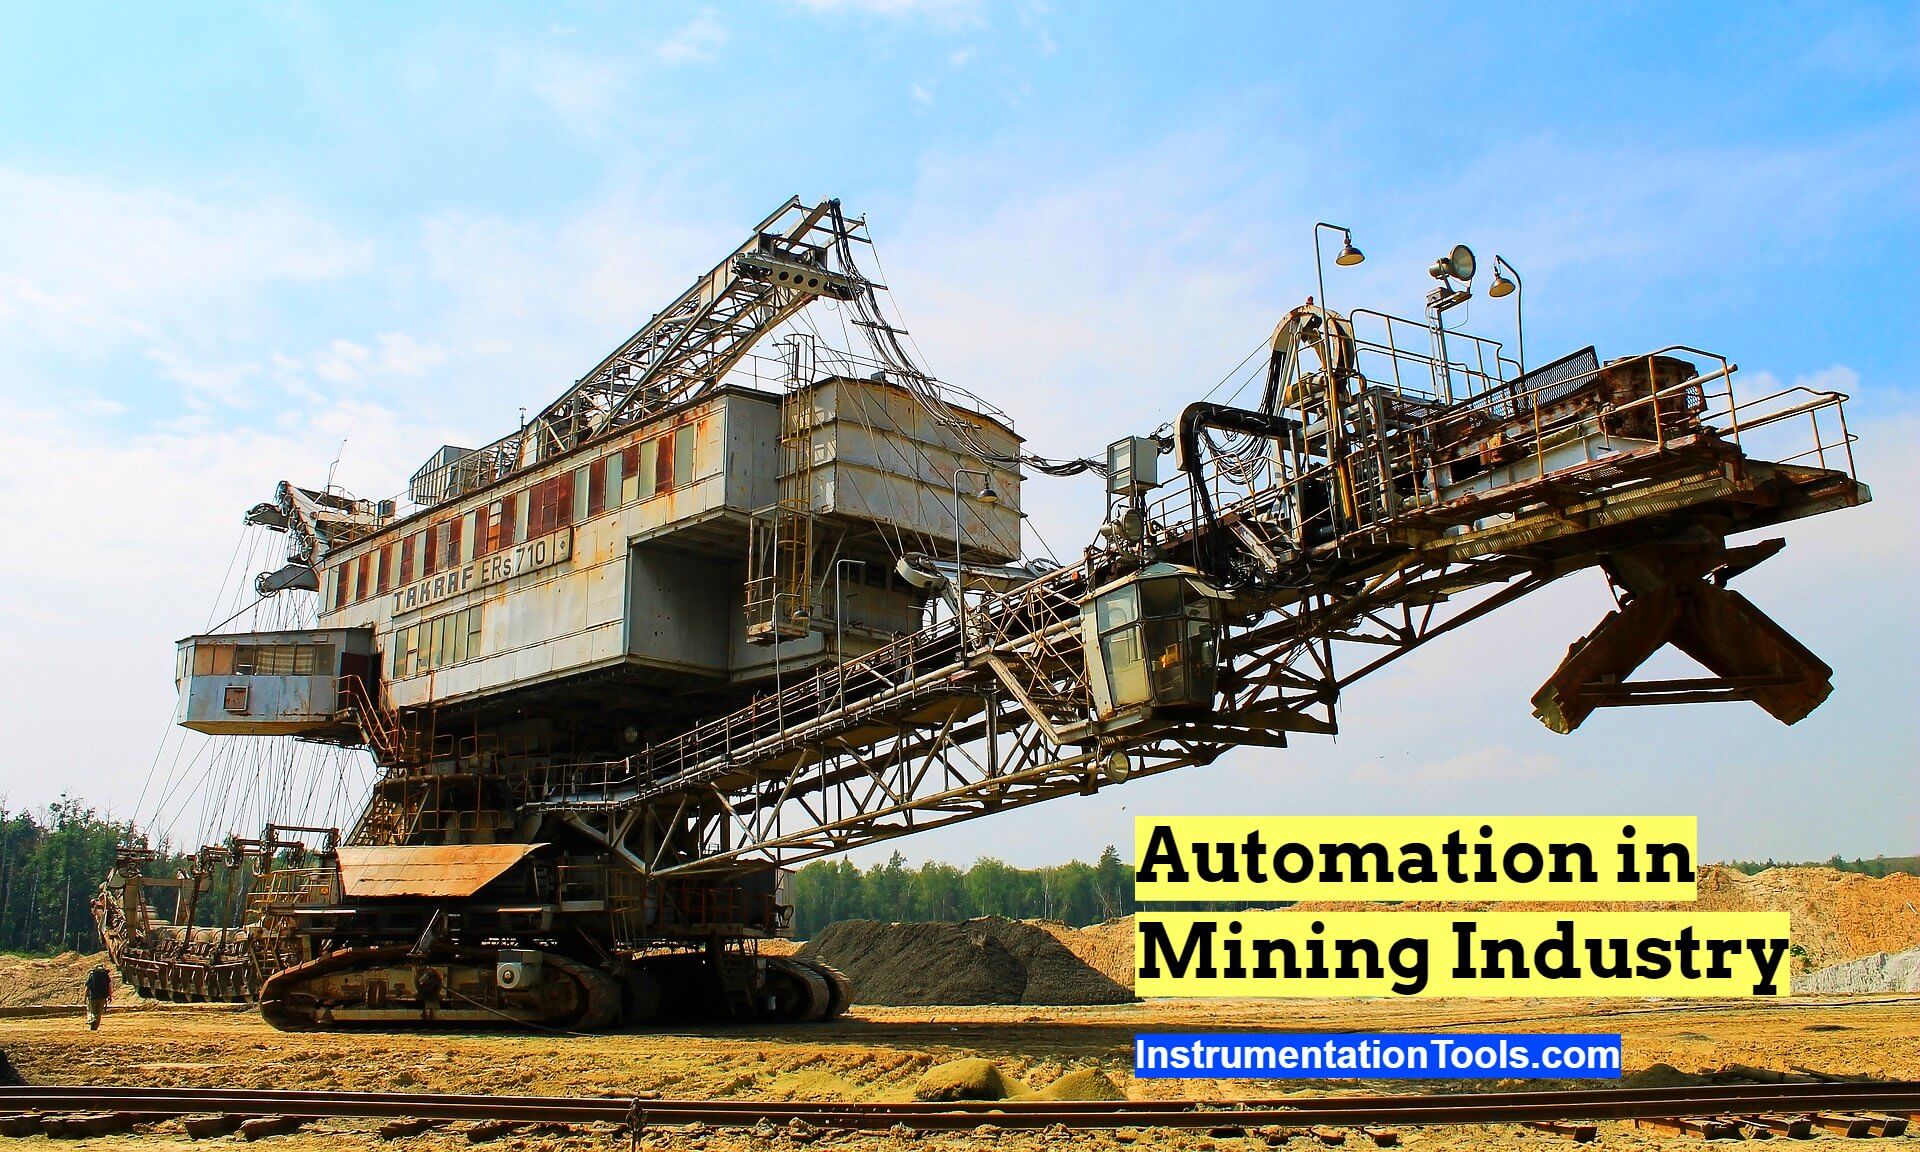 Automation in Mining Industry